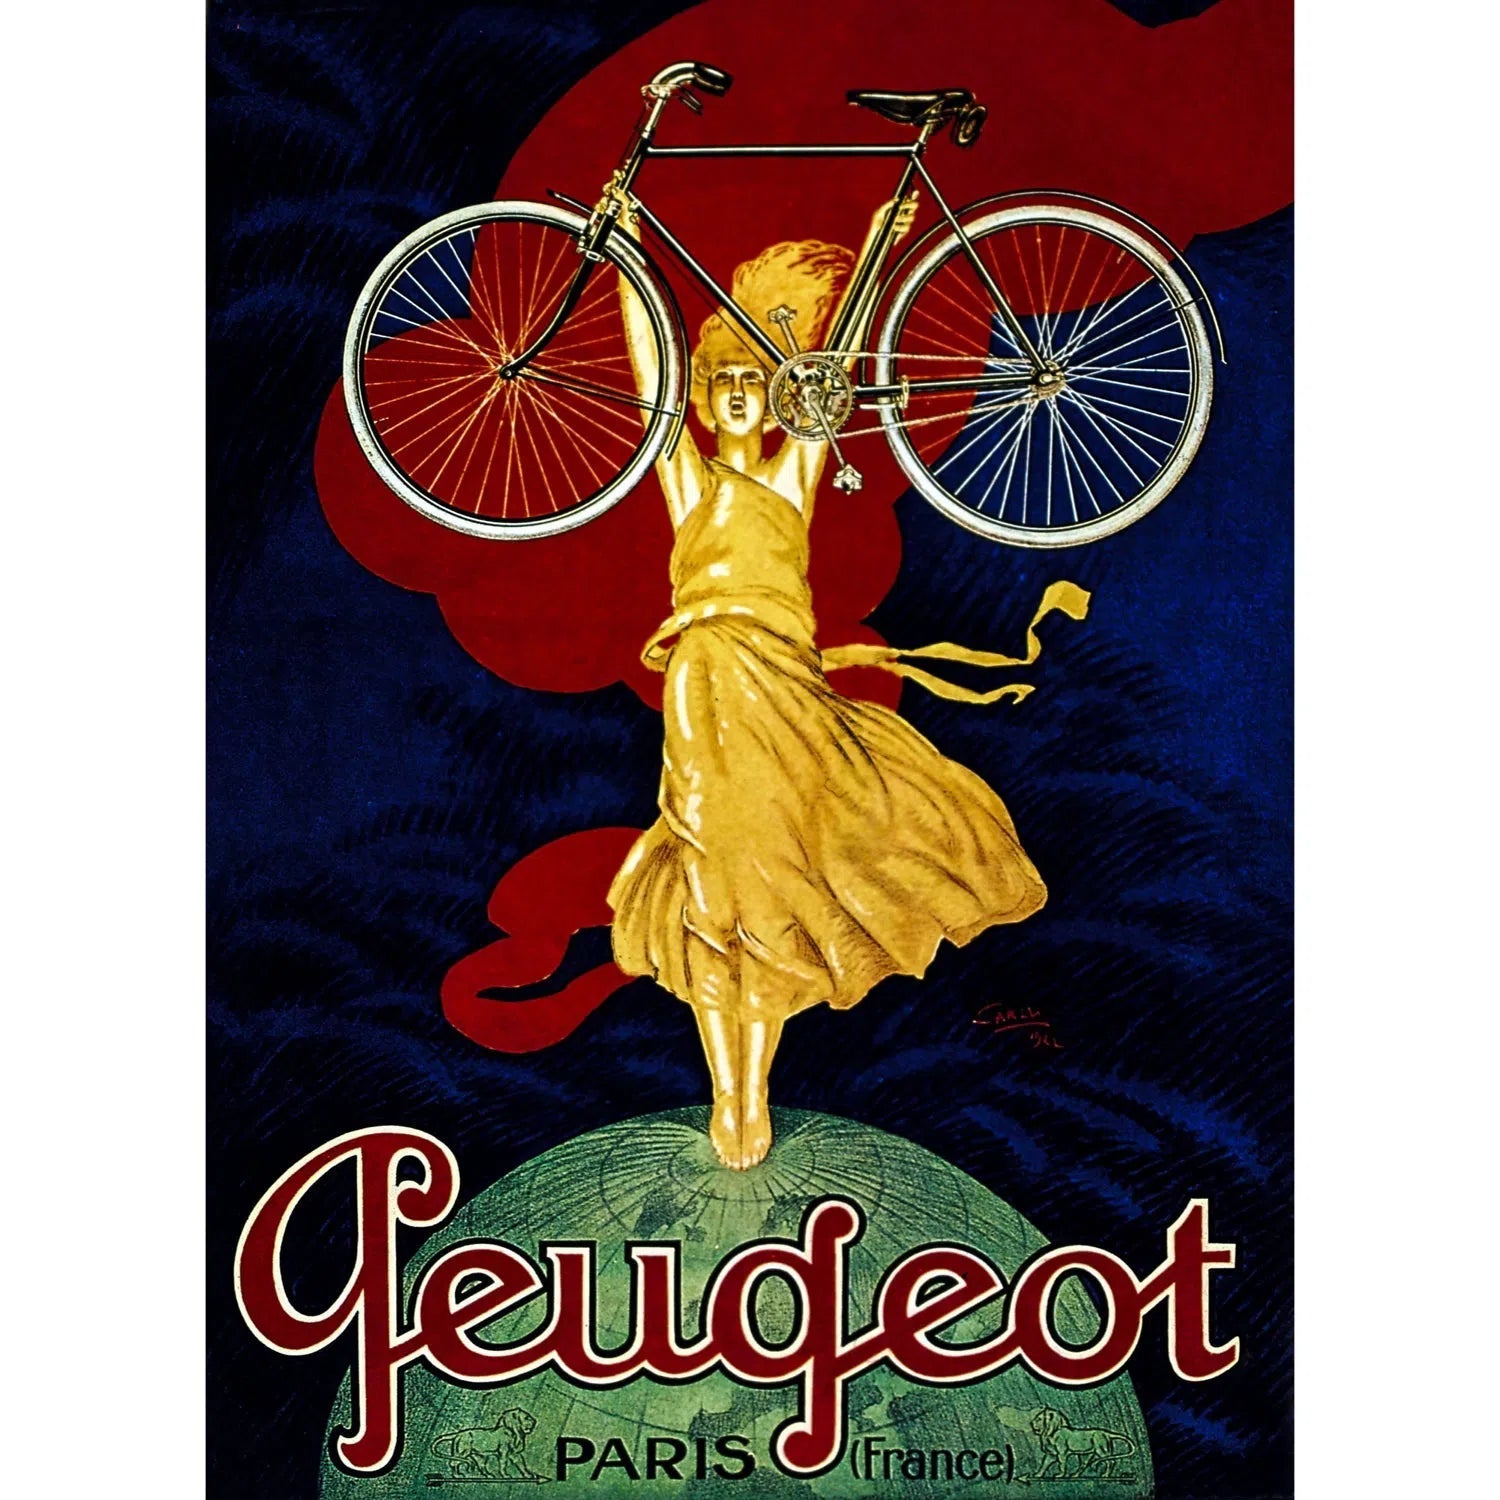 Cycle Peugeot-Imagesdartistes